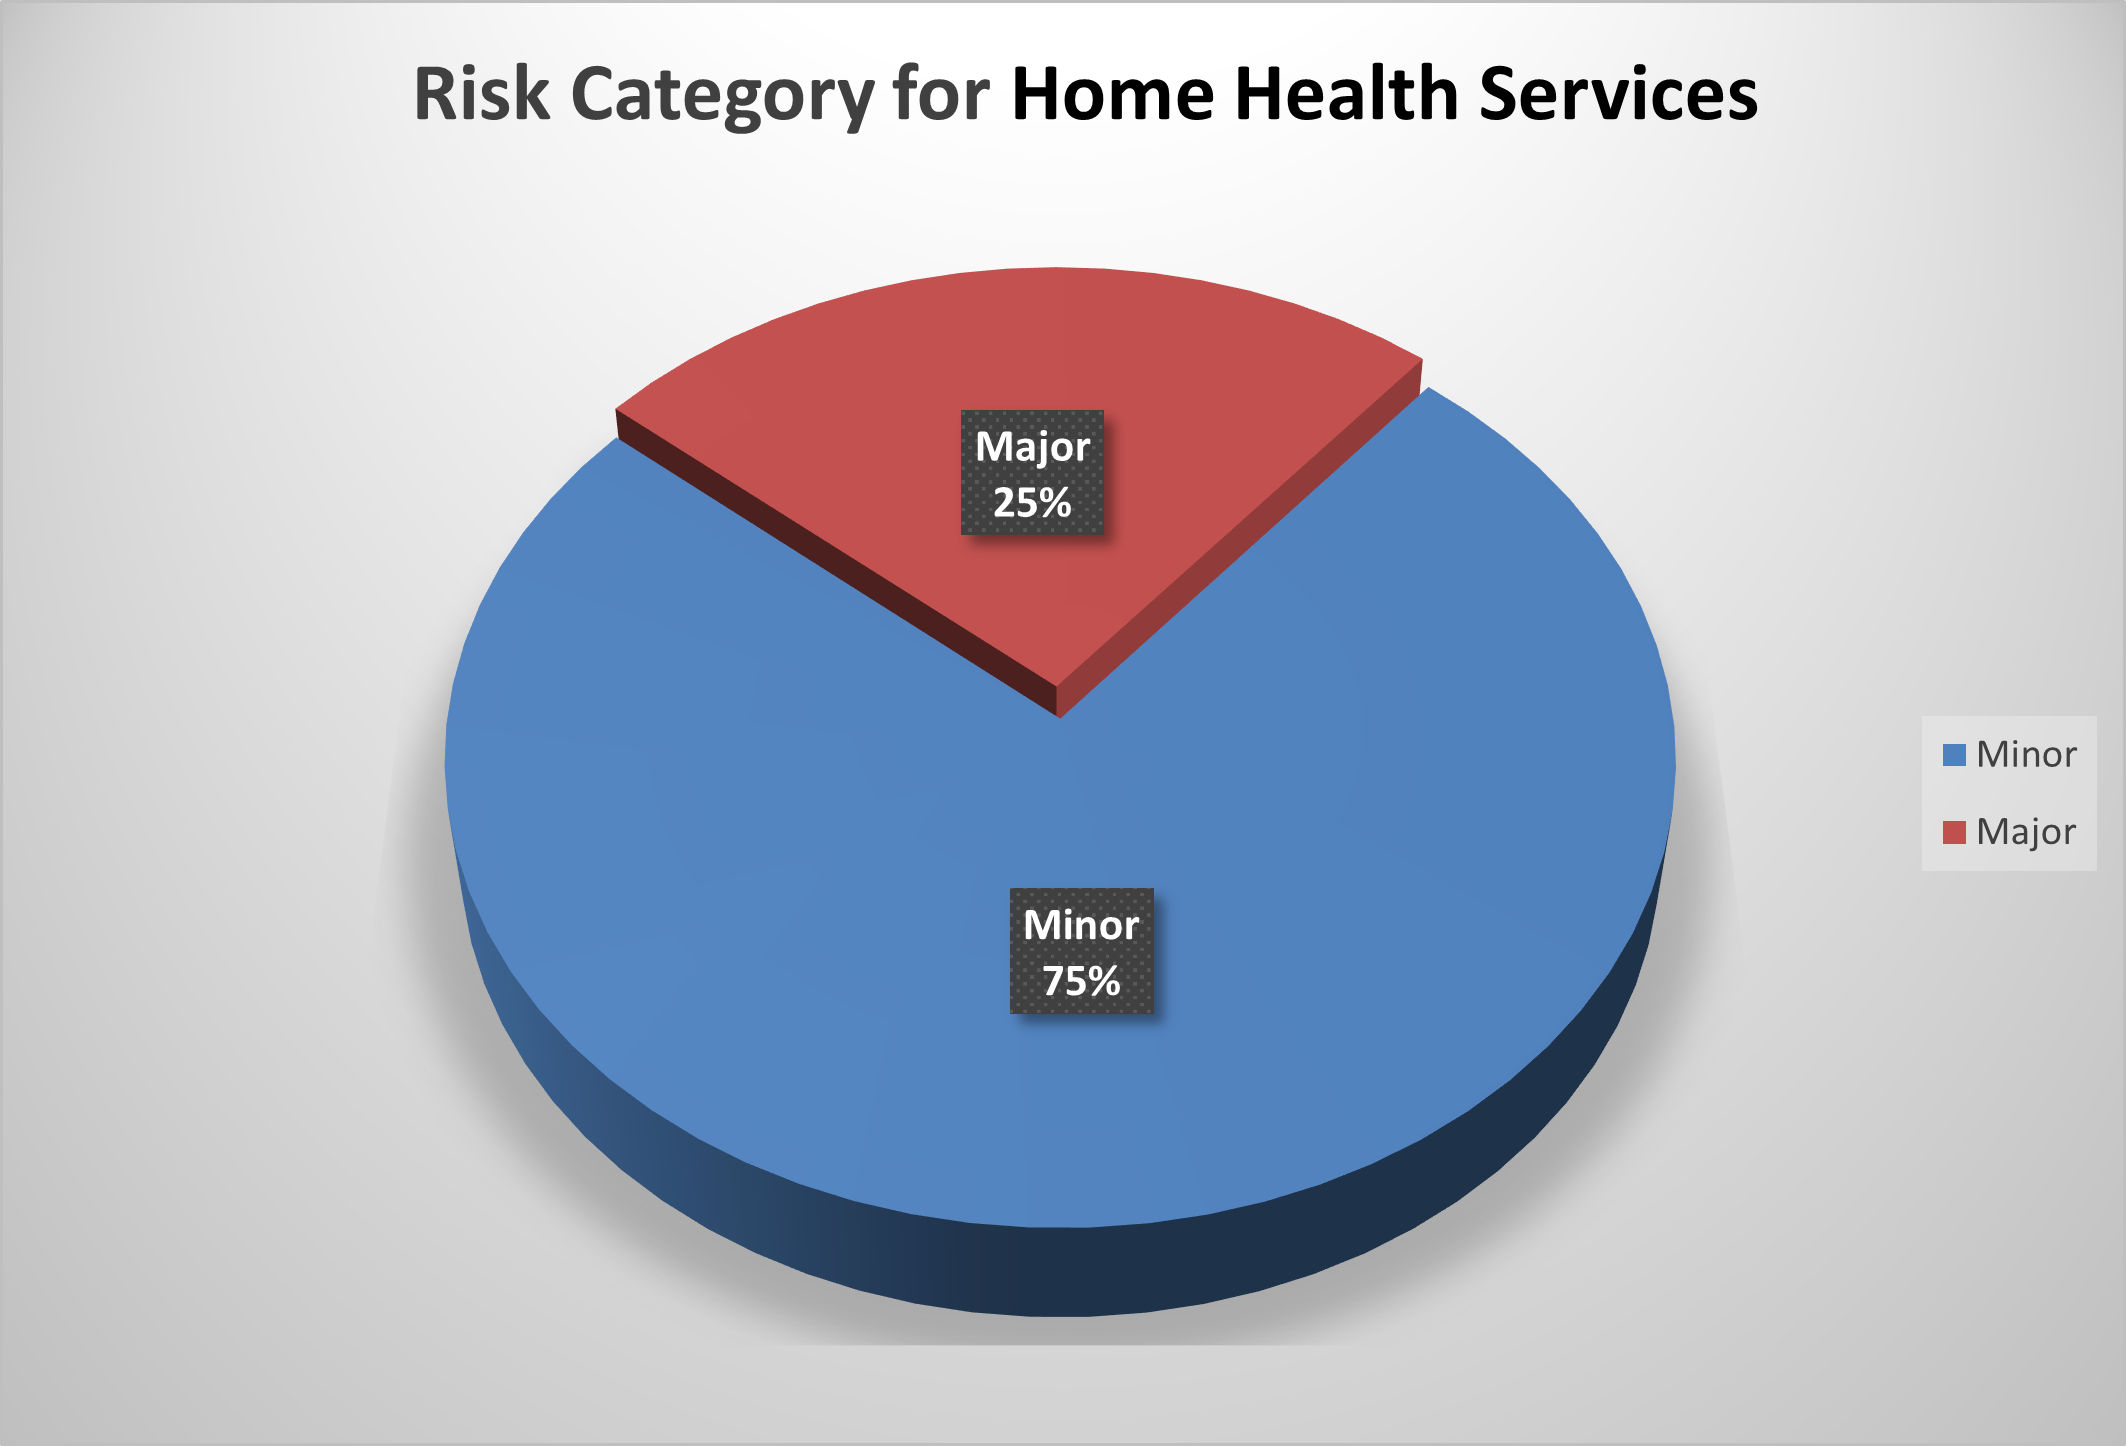 The categories for Home Health Services are defined major 25 percent and minor 78 percent.